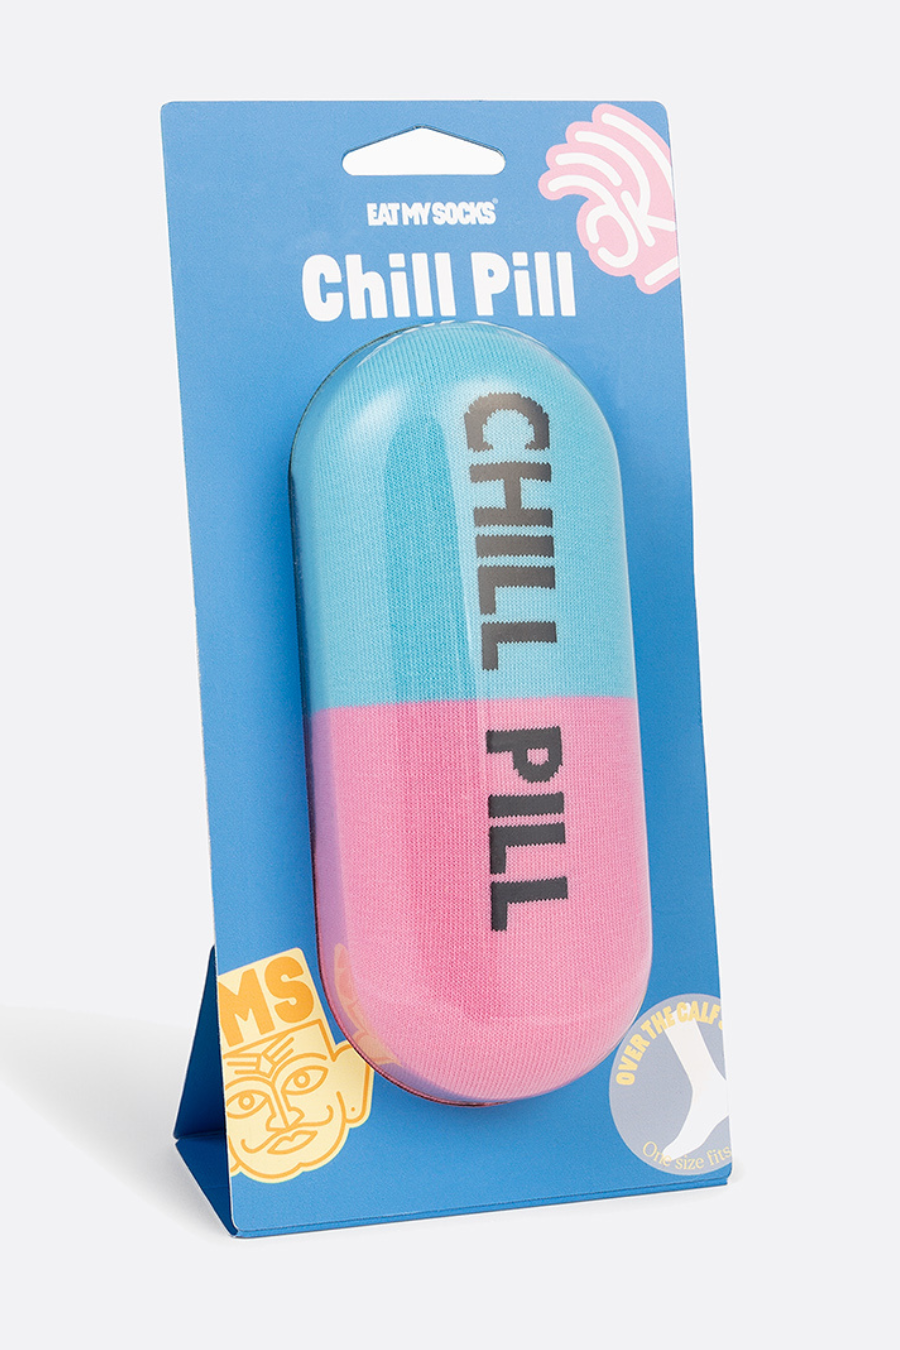 ChillPilleatmysockpackaged.png